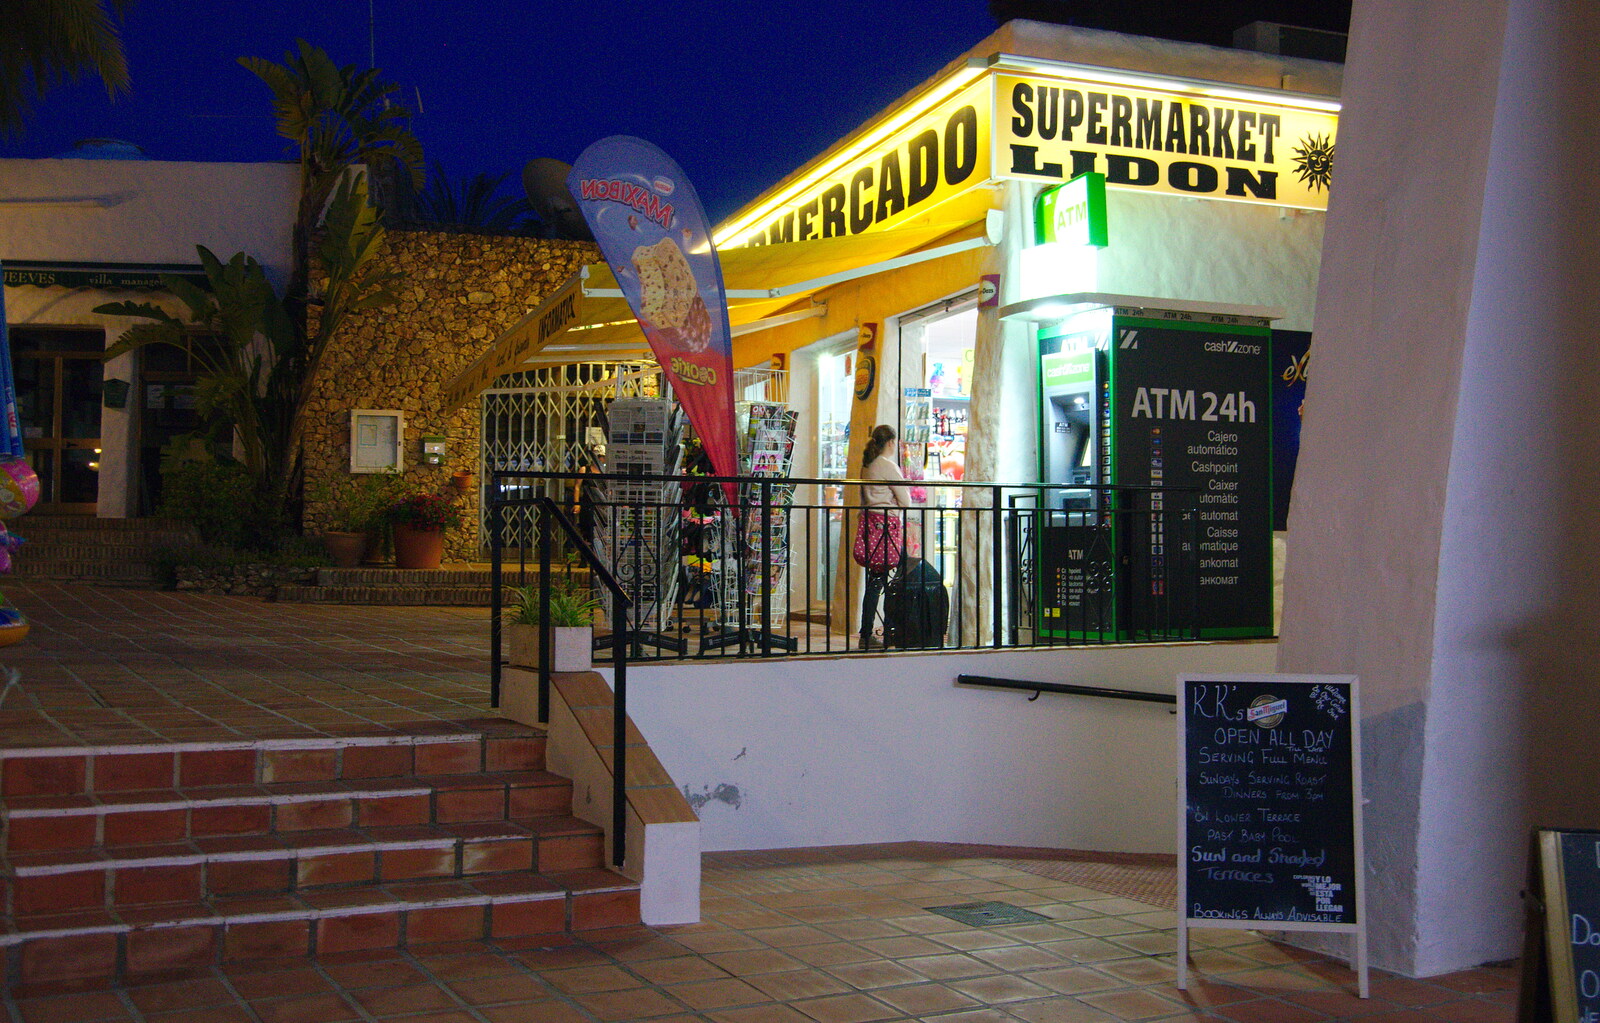 Isobel visits Supermercado Lidon for extra supplies from A Holiday in Nerja, Andalusia, Spain - 15th April 2019